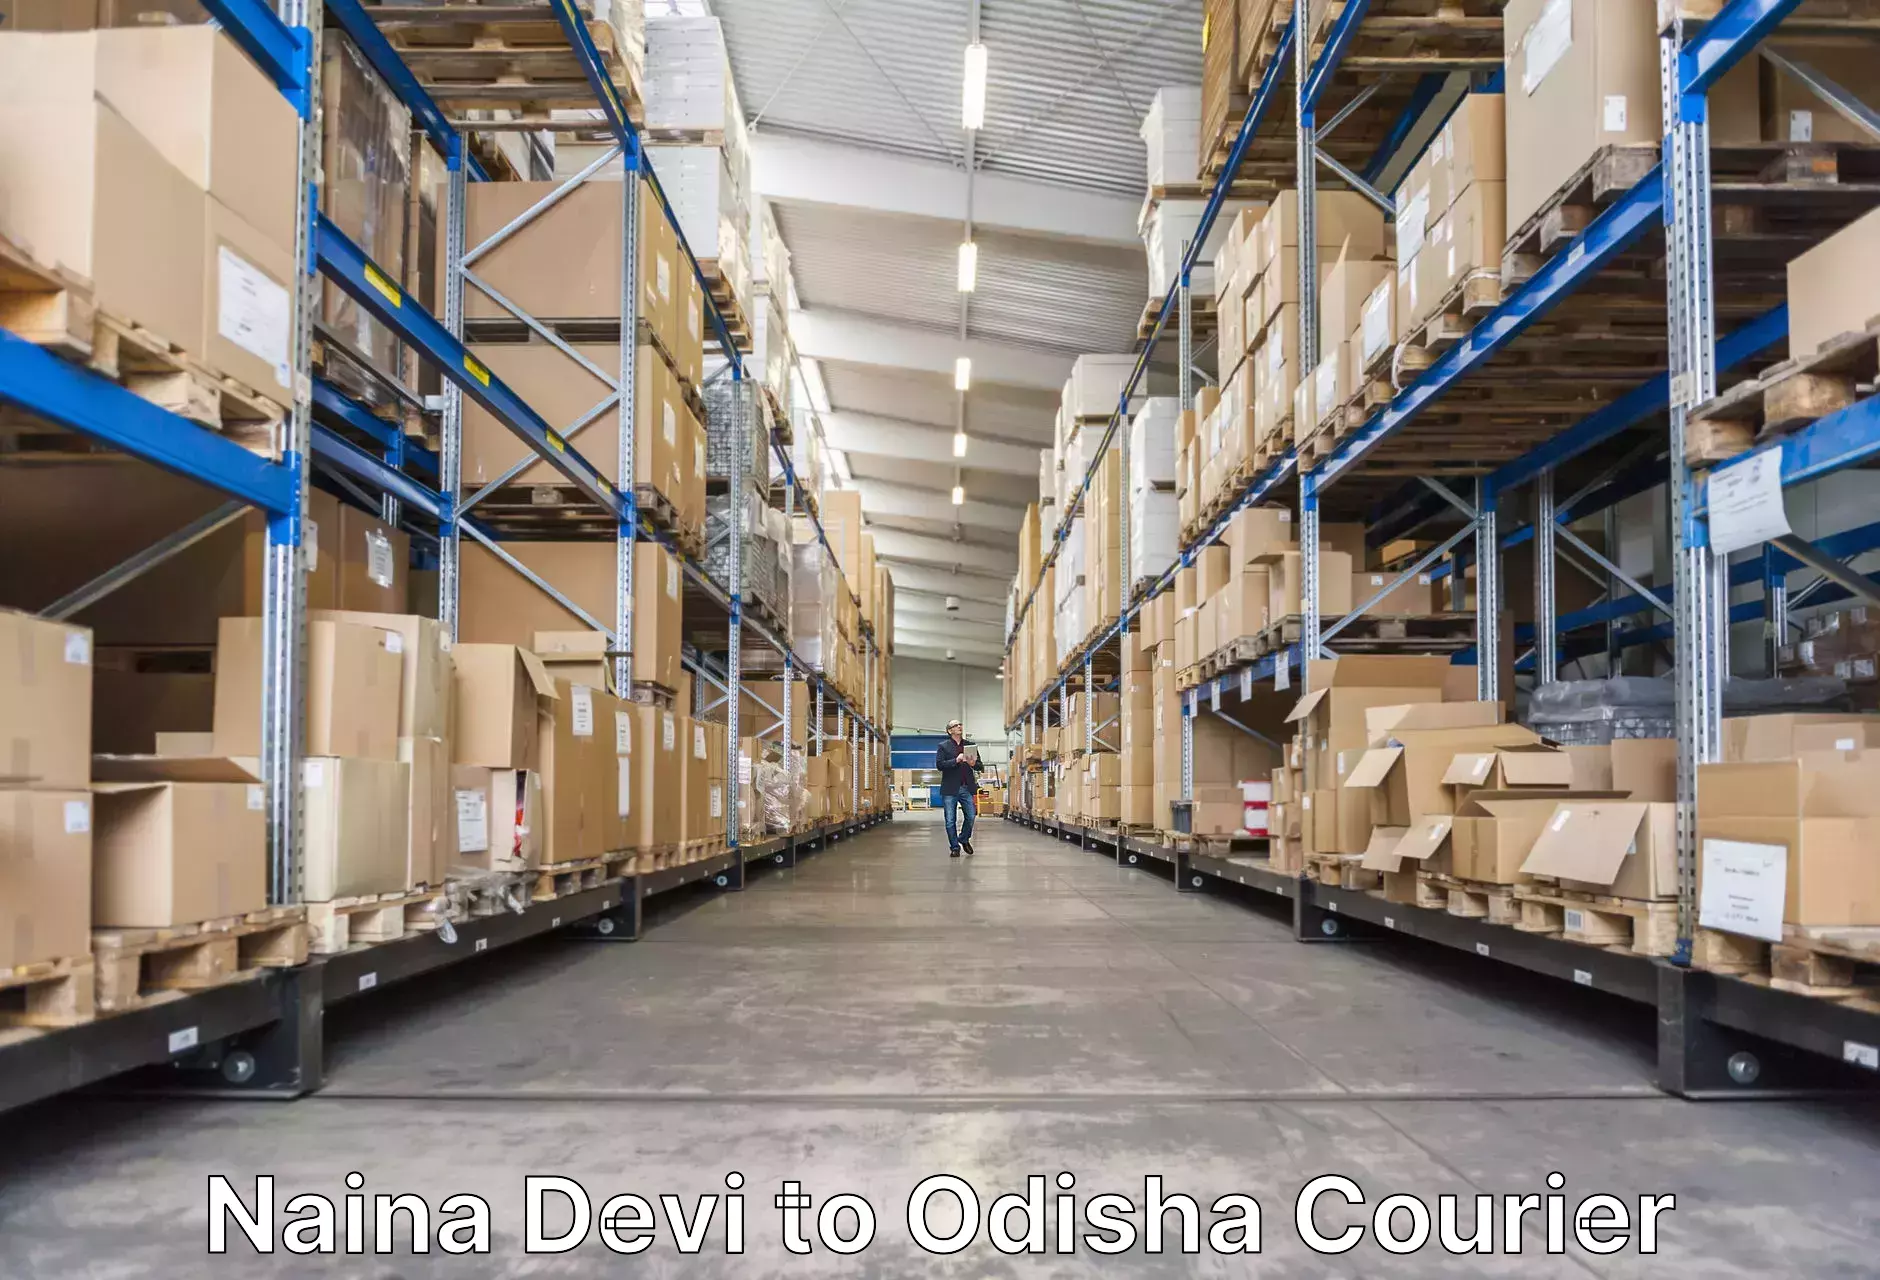 Personal effects shipping in Naina Devi to Odisha